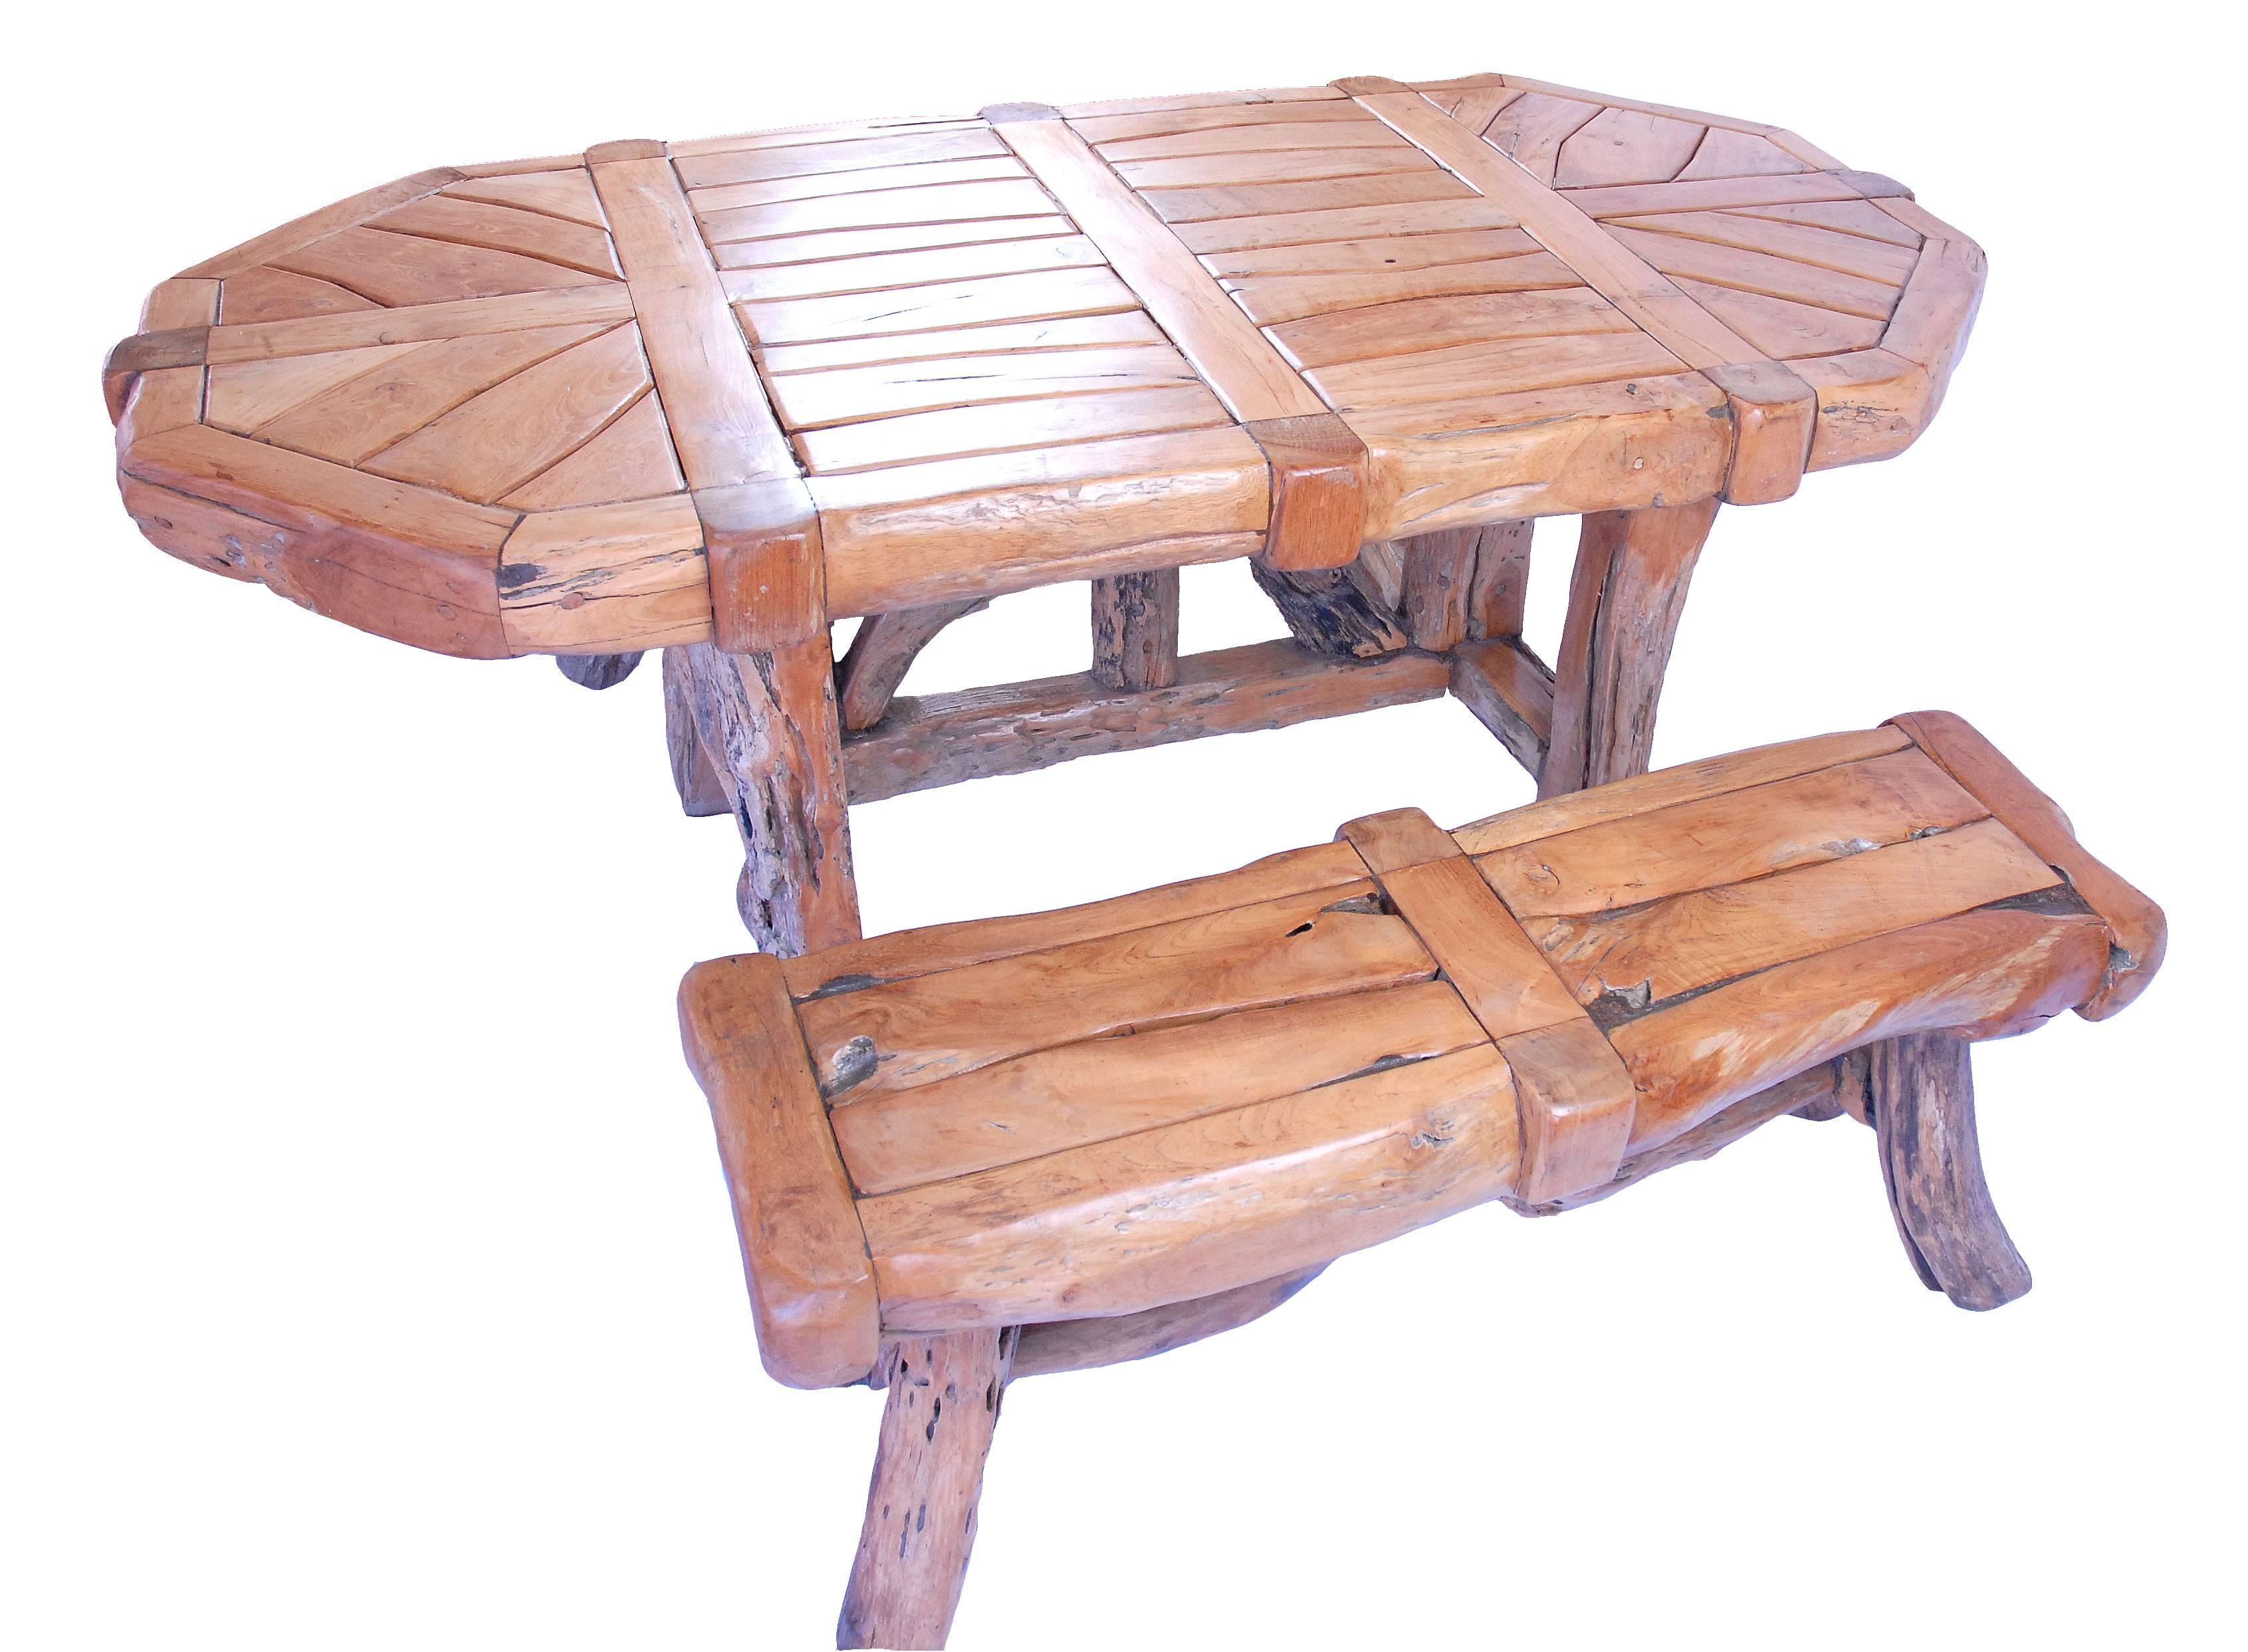 Sustainably harvested teak dining table set with benches.